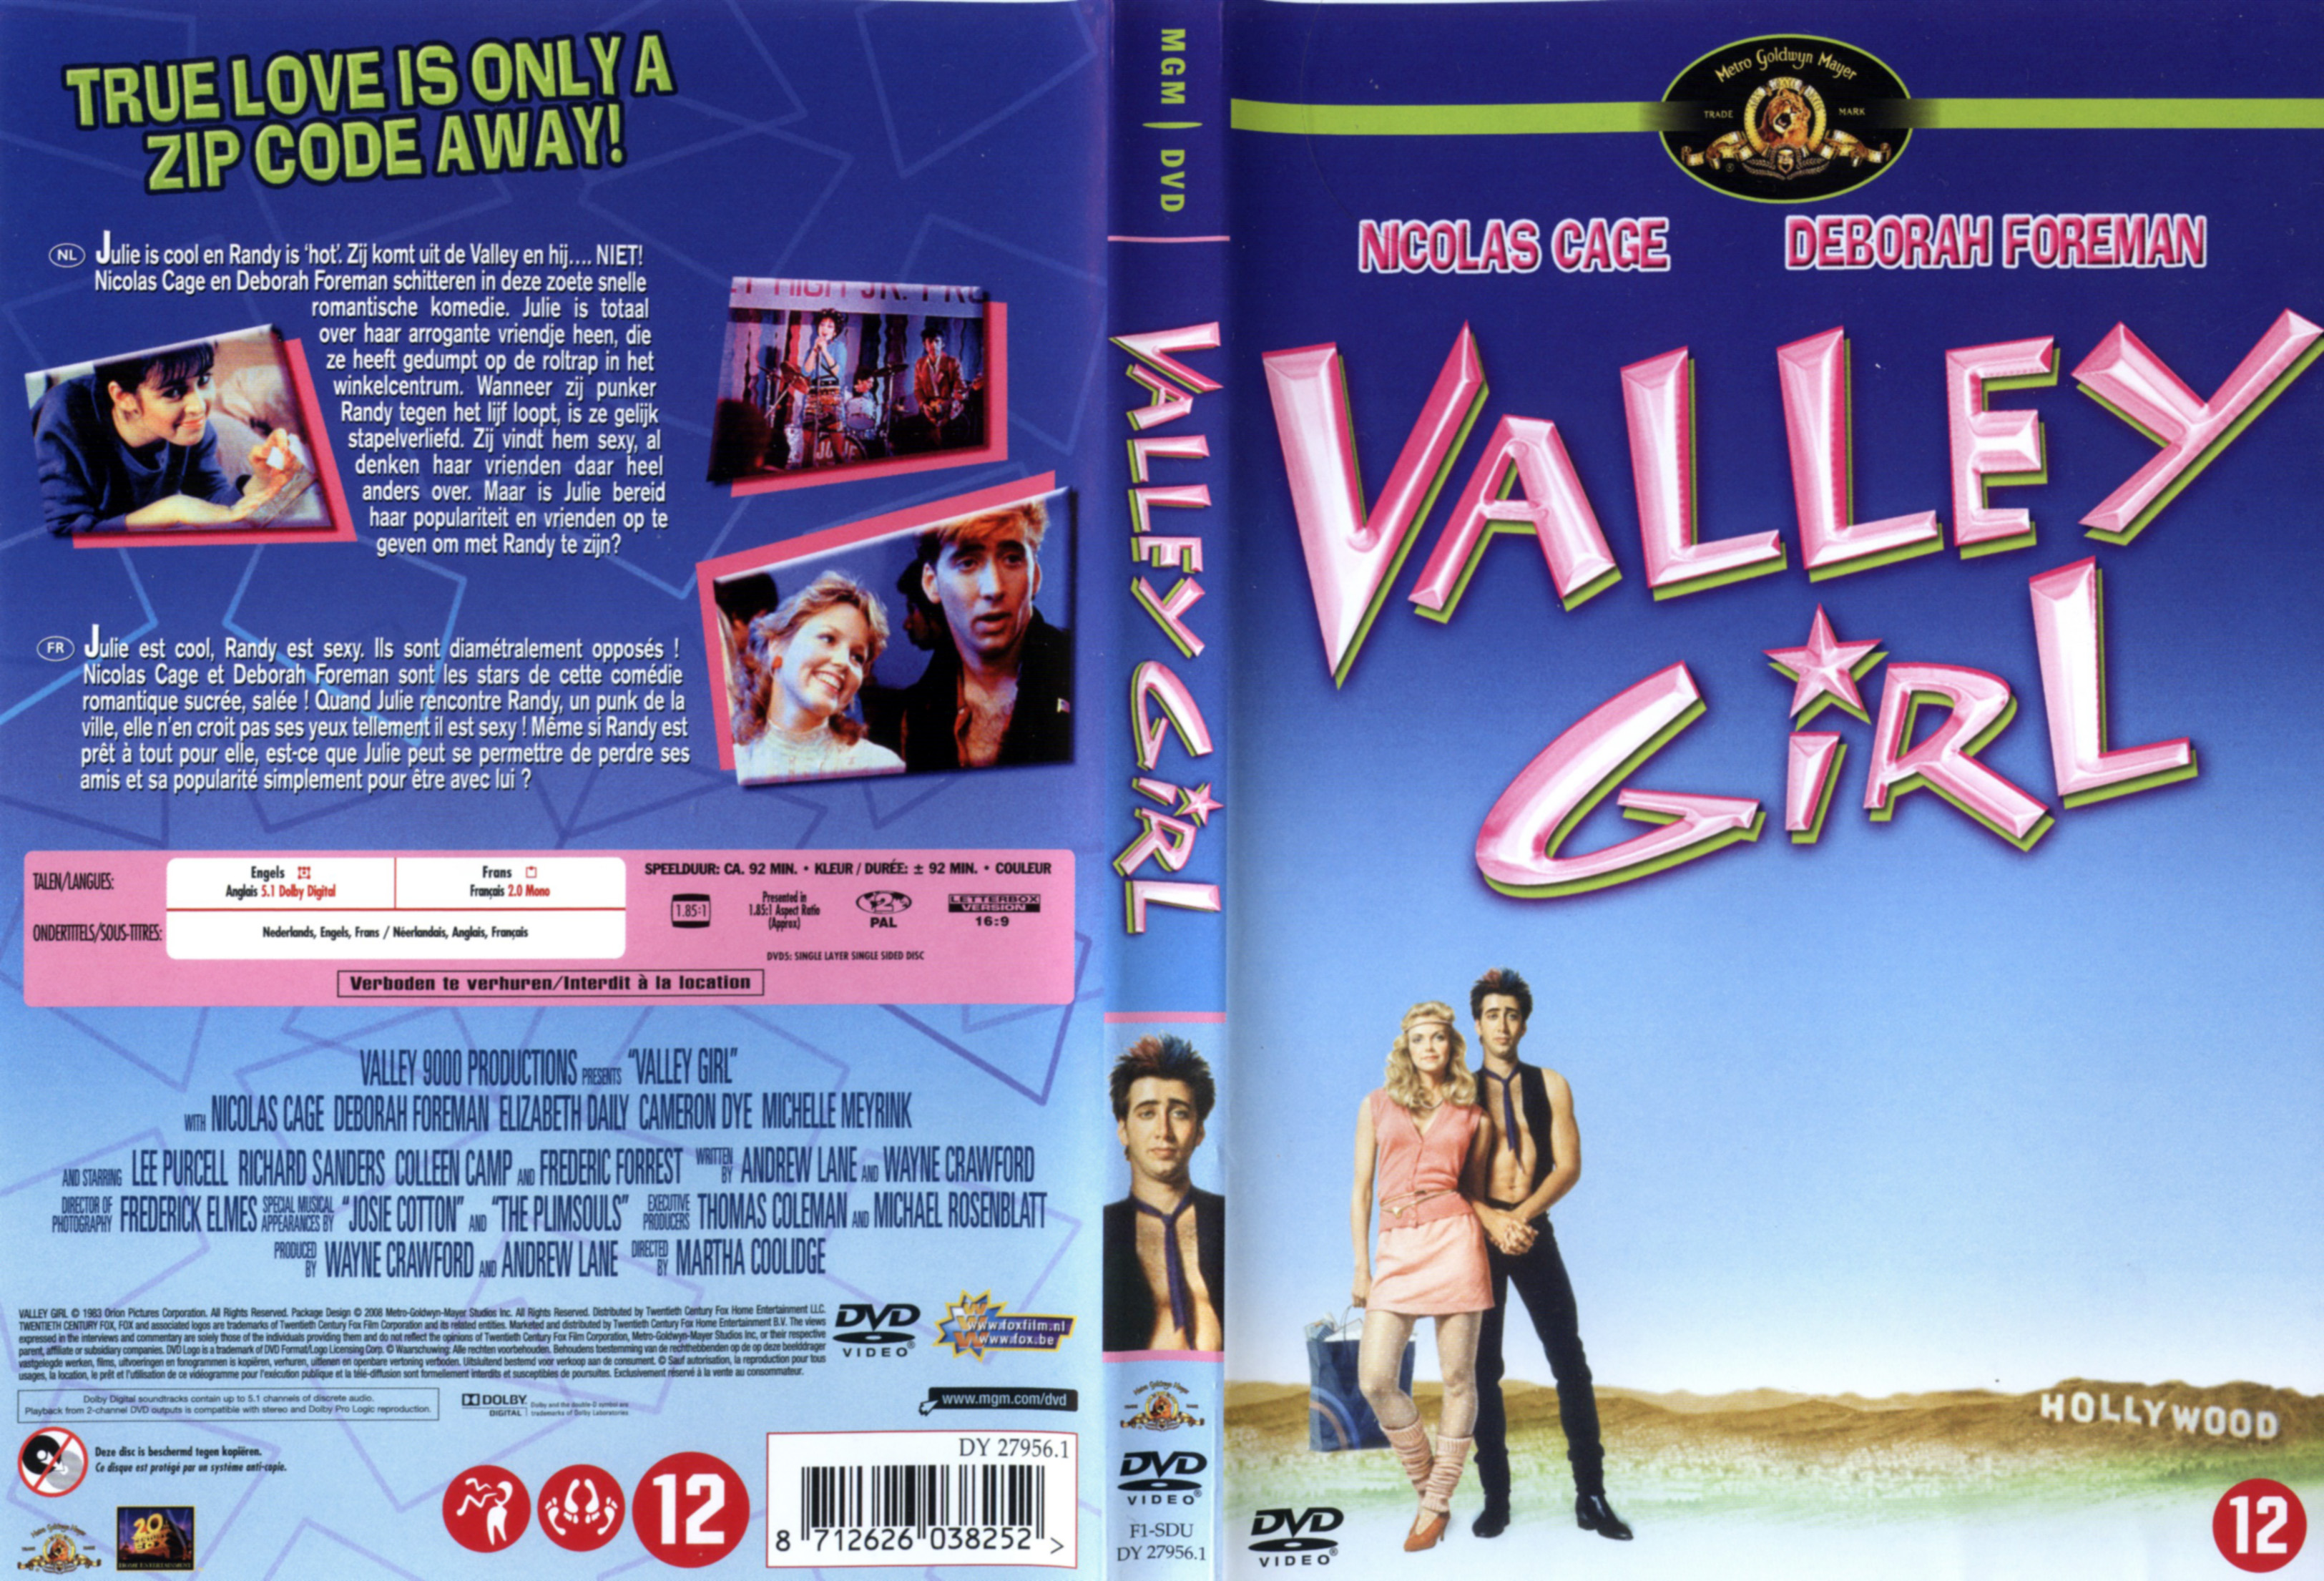 Jaquette DVD Valley girl